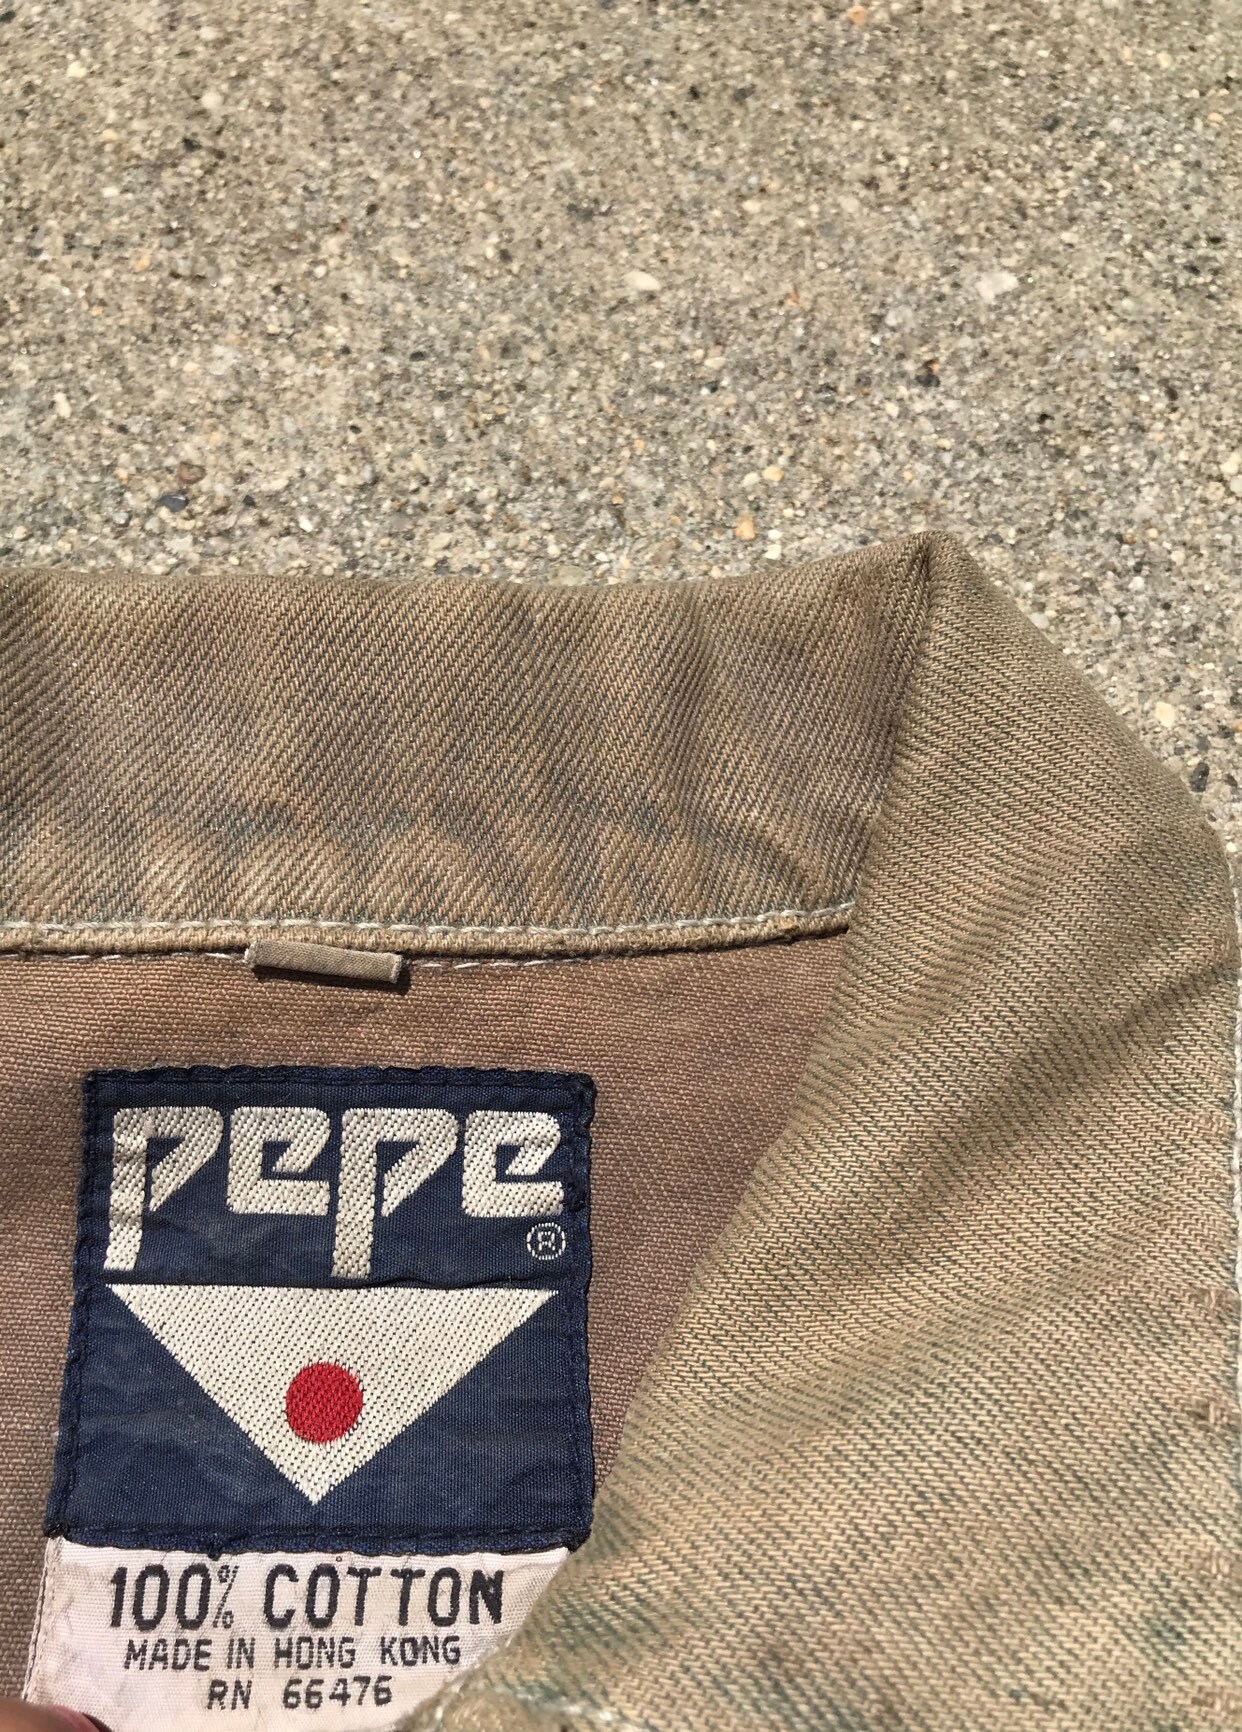 Pepe Jeans Vintage Made in Hong Kong Overdyed Woman Portrait | Etsy